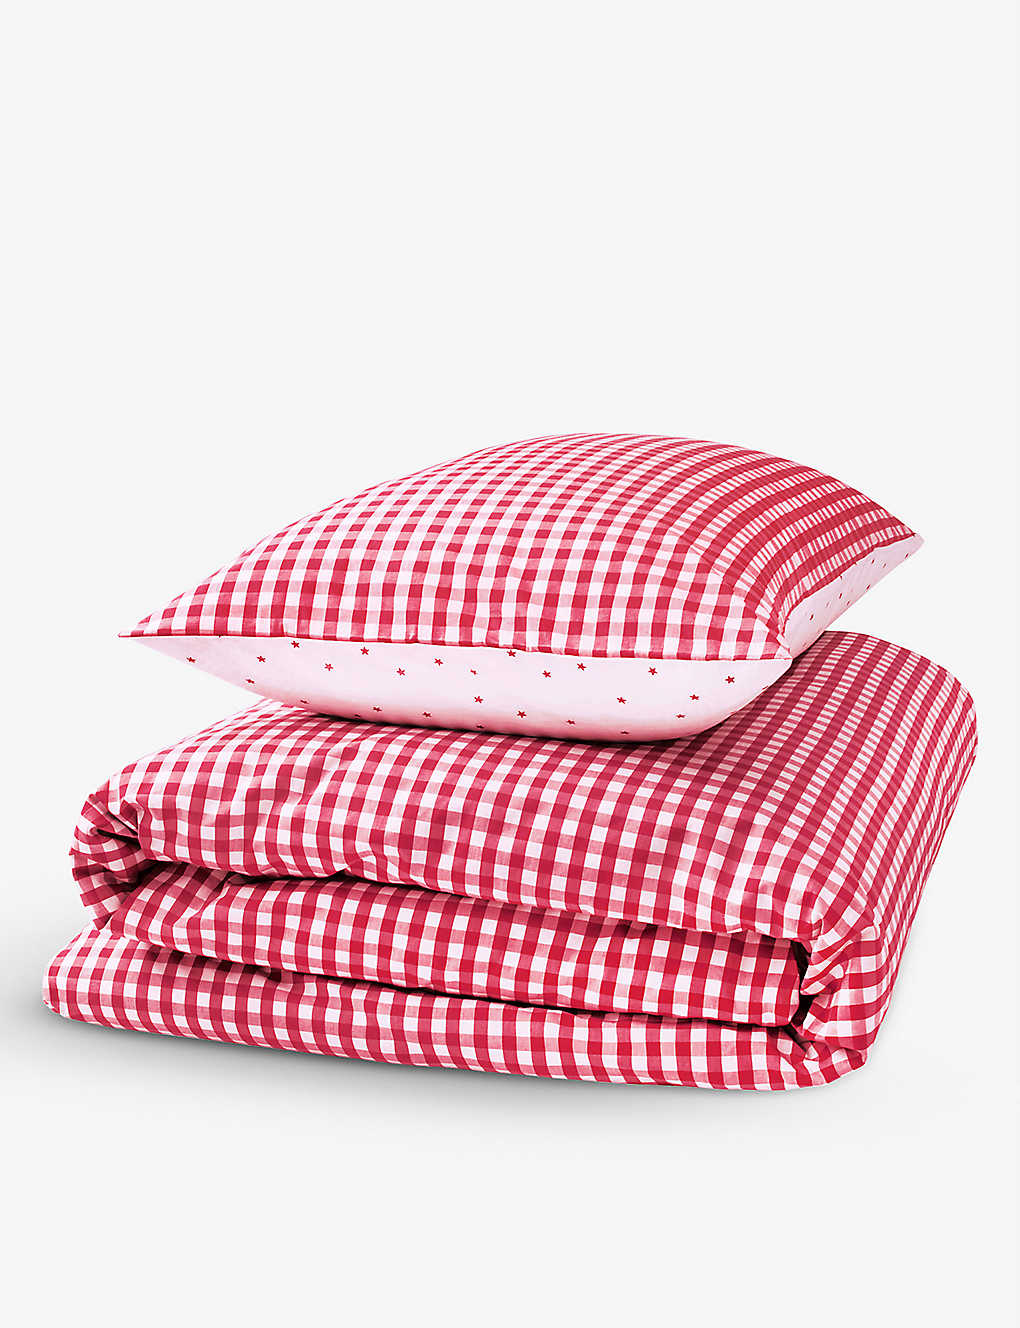 The Little White Company Red Gingham Cotton Cot Sheet Set Cot Bed